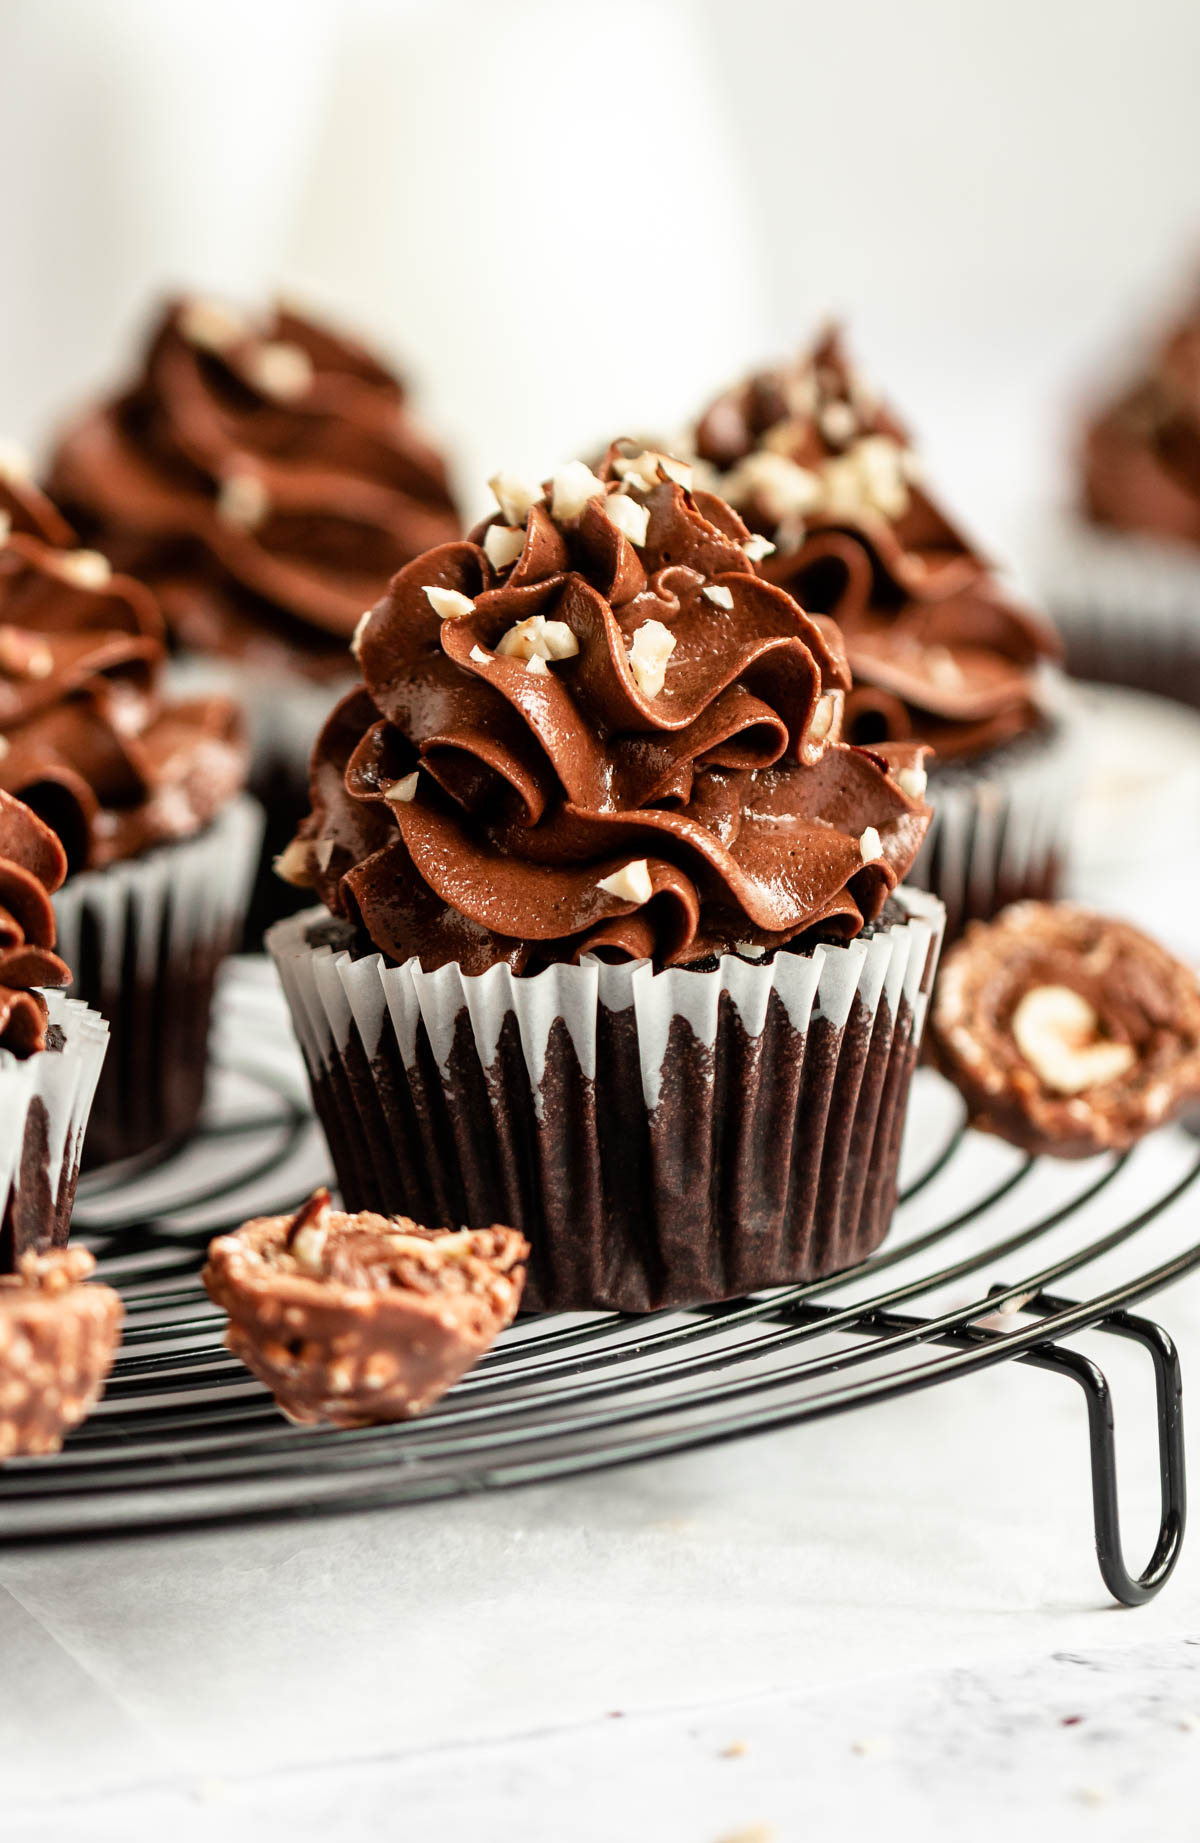 Cupcakes with nutella frosting.